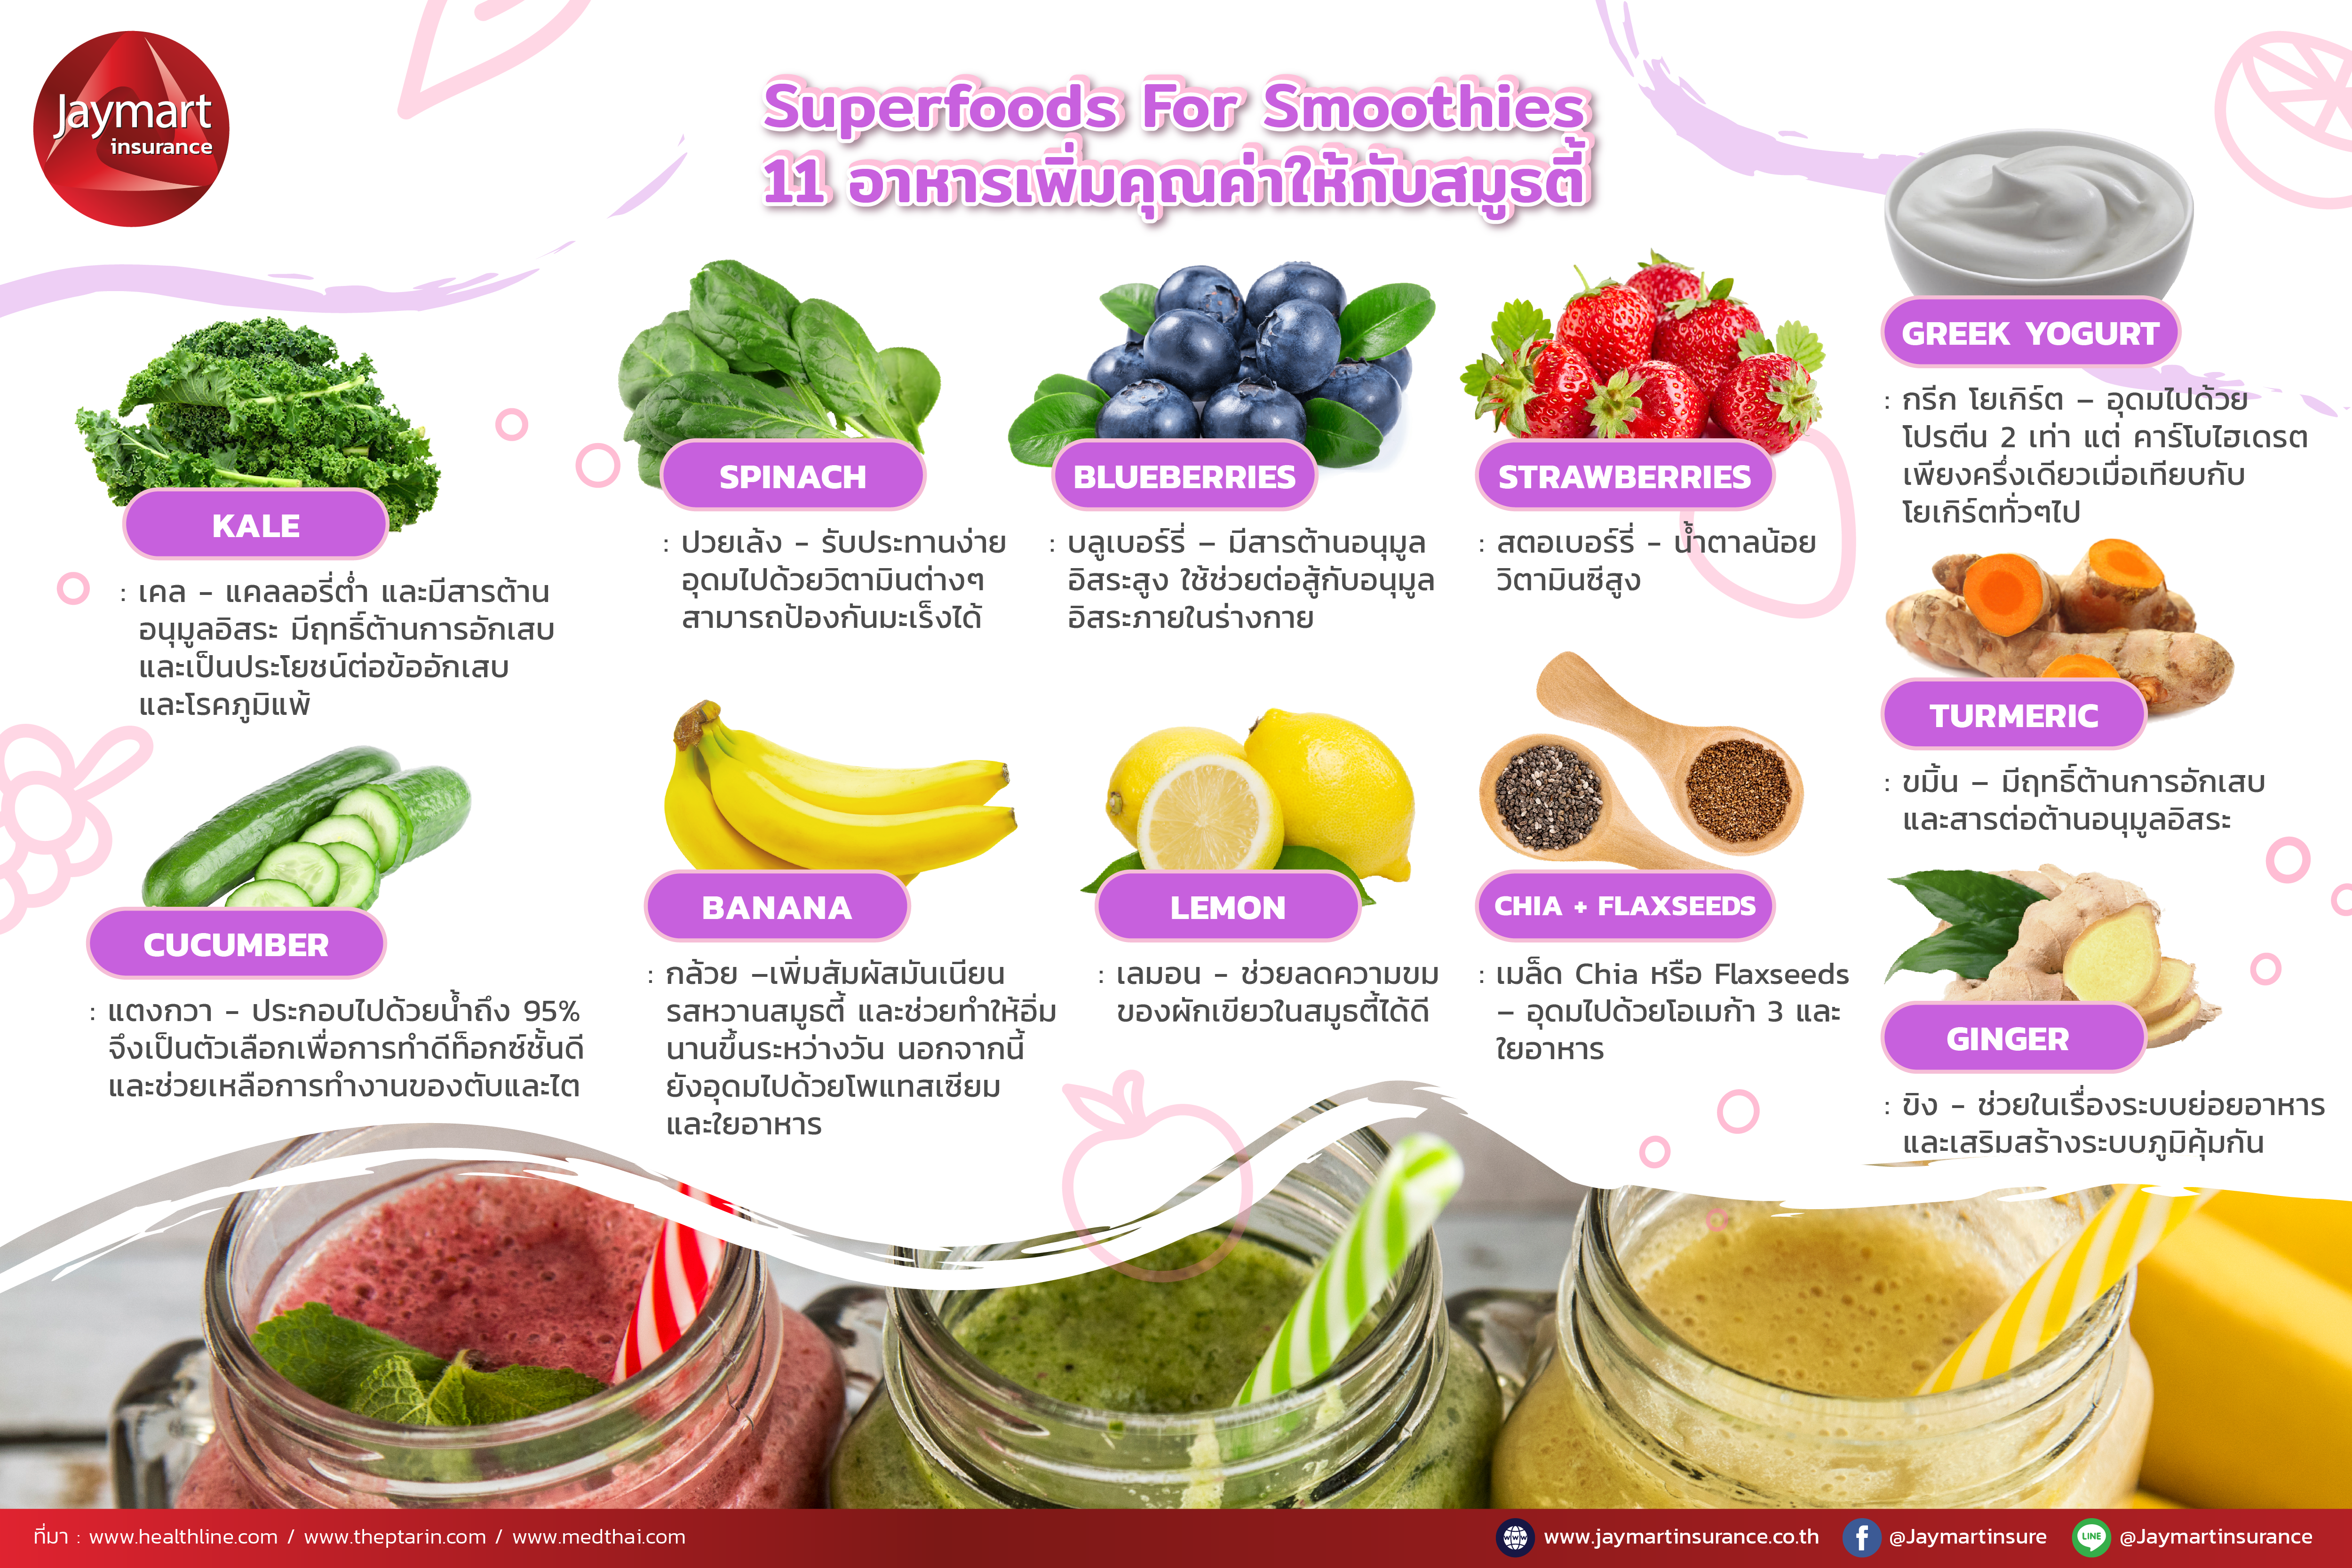 11 Superfoods For Smoothies 11 อาหารเพิ่มคุณค่าให้กับสมูธตี้